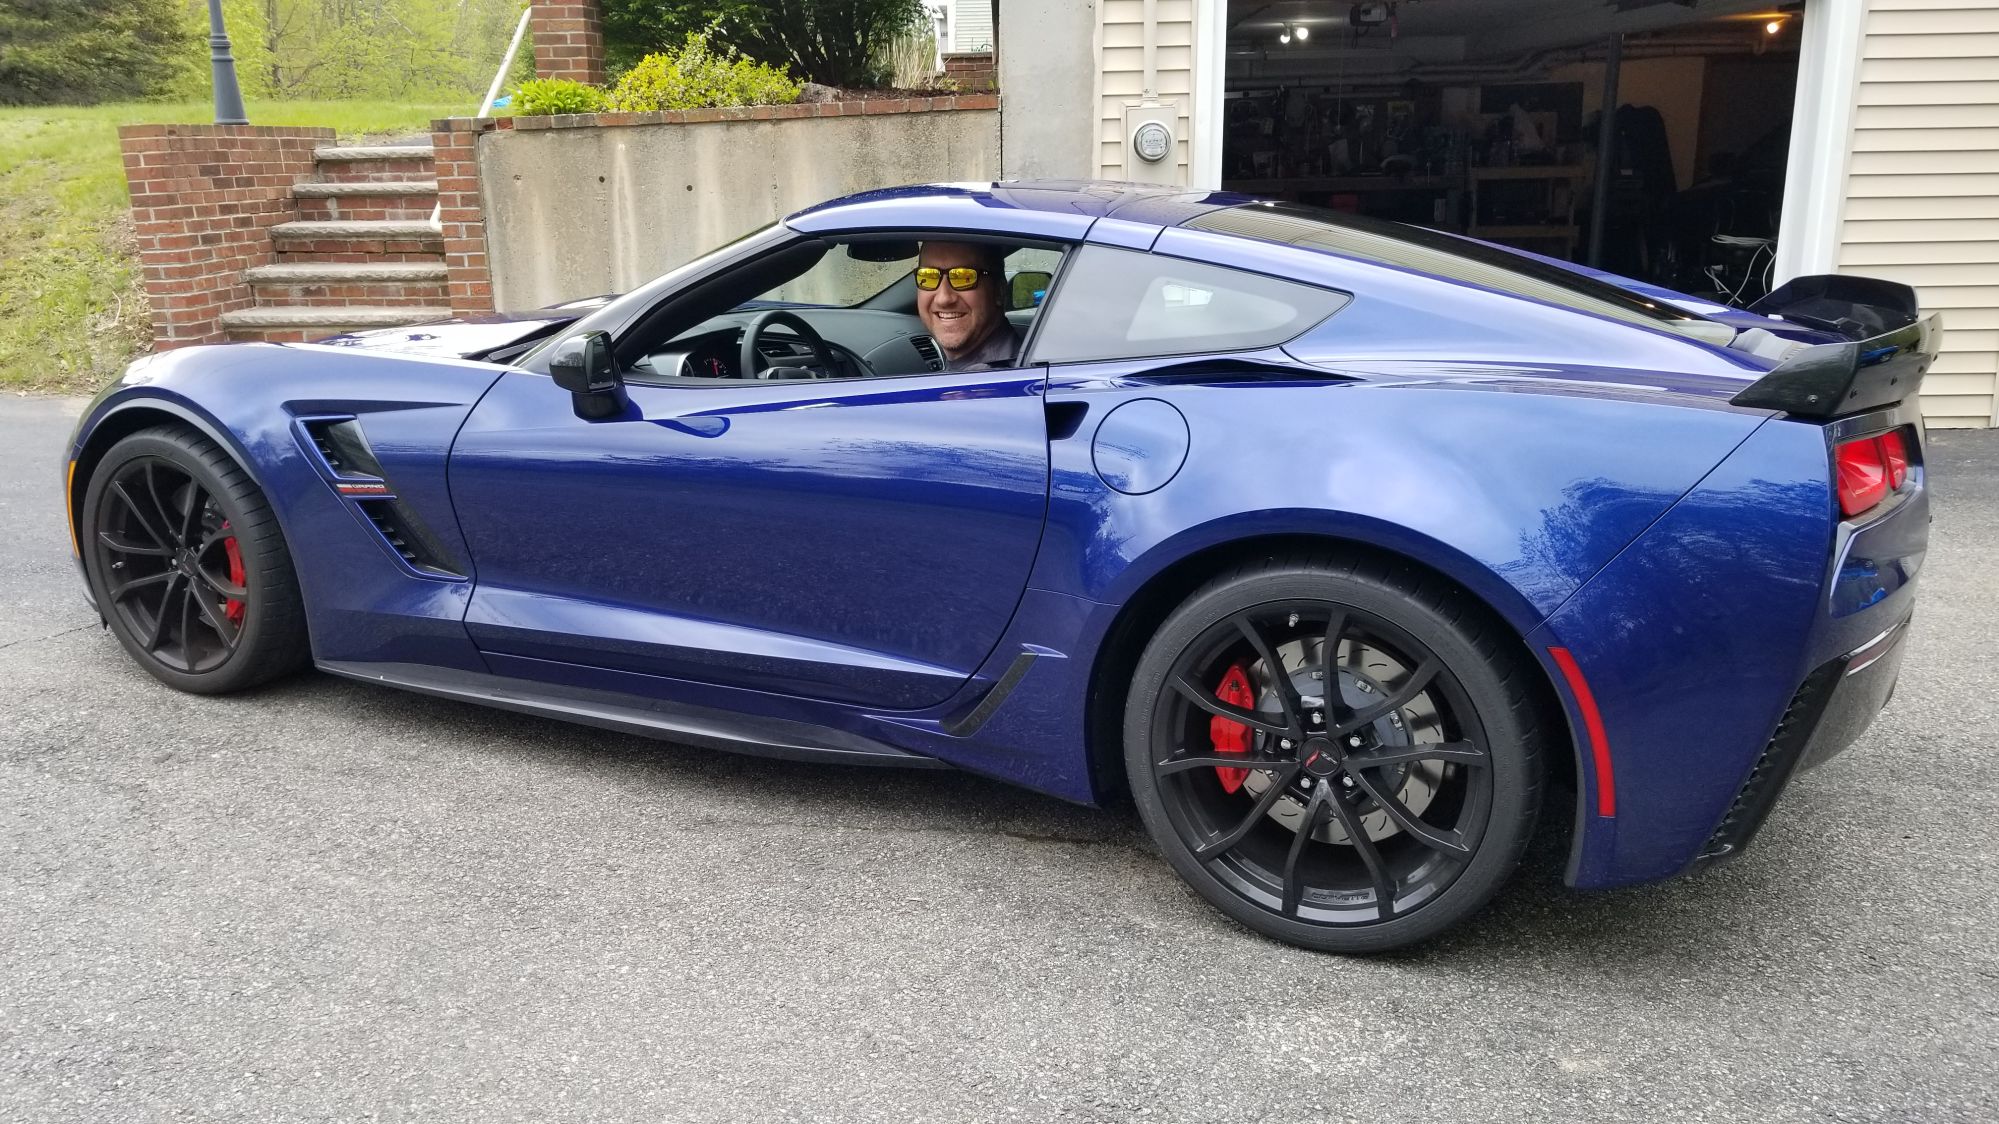 Are Corvette Owners Getting Younger?